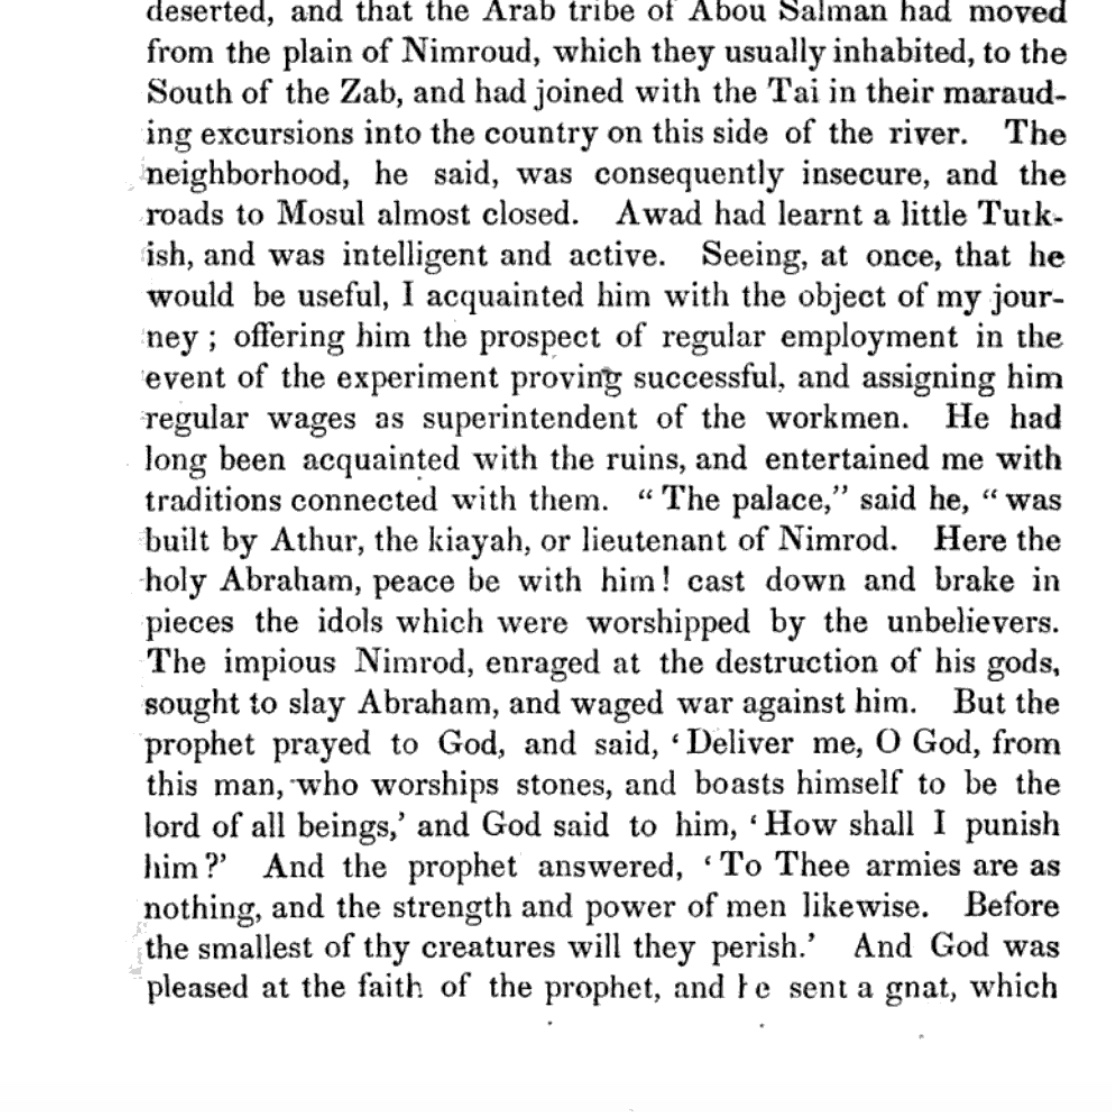 As Warren says, Layard tells of a similar story about a gnat getting into Nimrod's brain and killing him, which he heard near Nimrud in Iraq.(Layard, Nineveh and Its Remains)